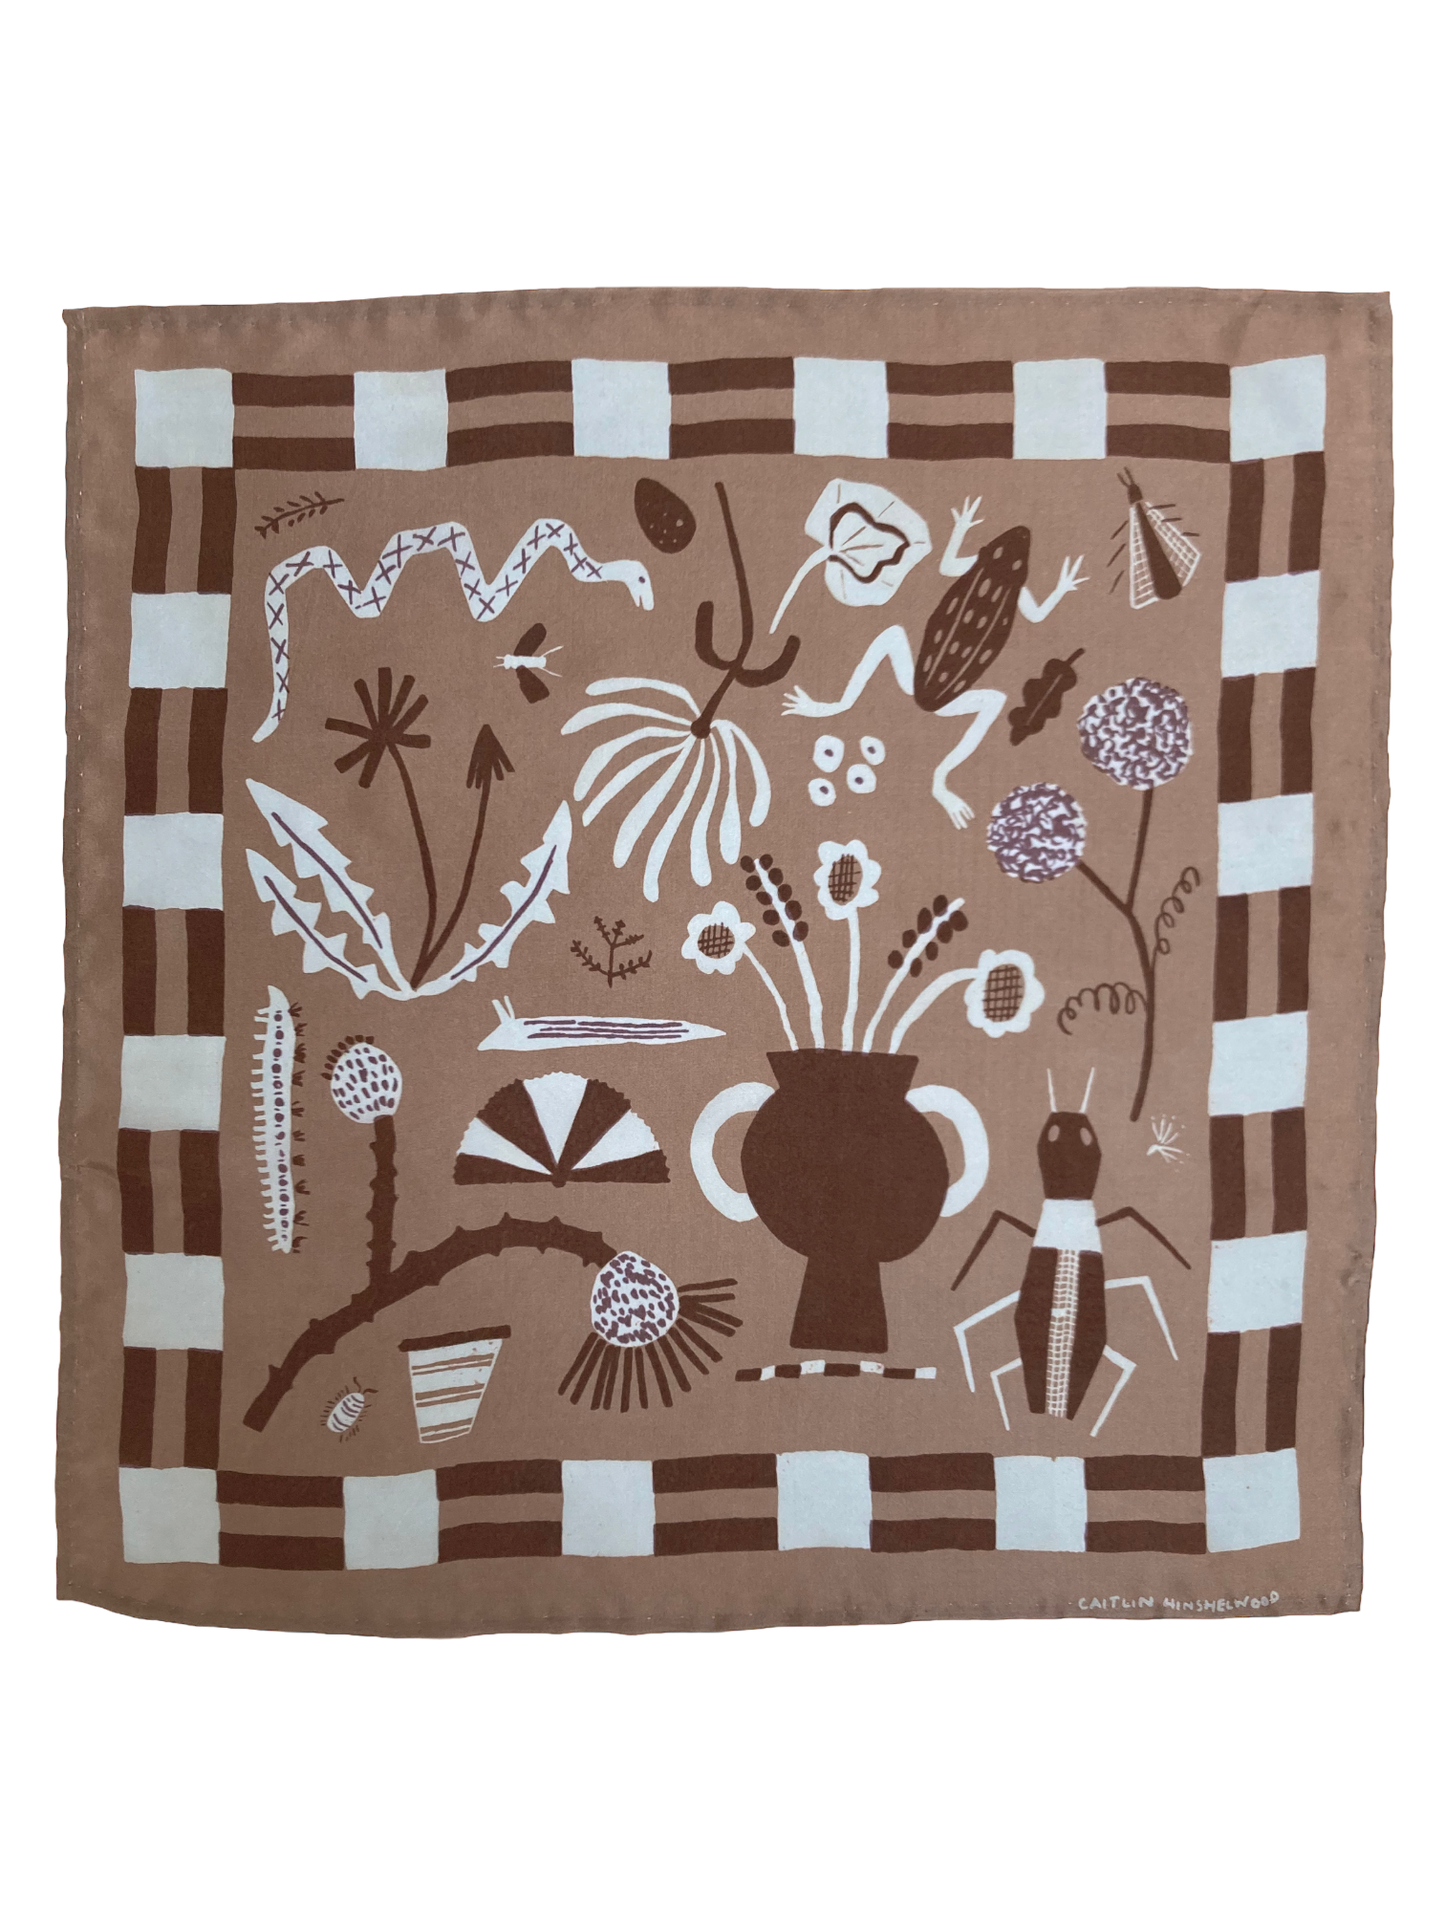 Field Notes Silk Scarf in Beige by Caitlin Hinshelwood